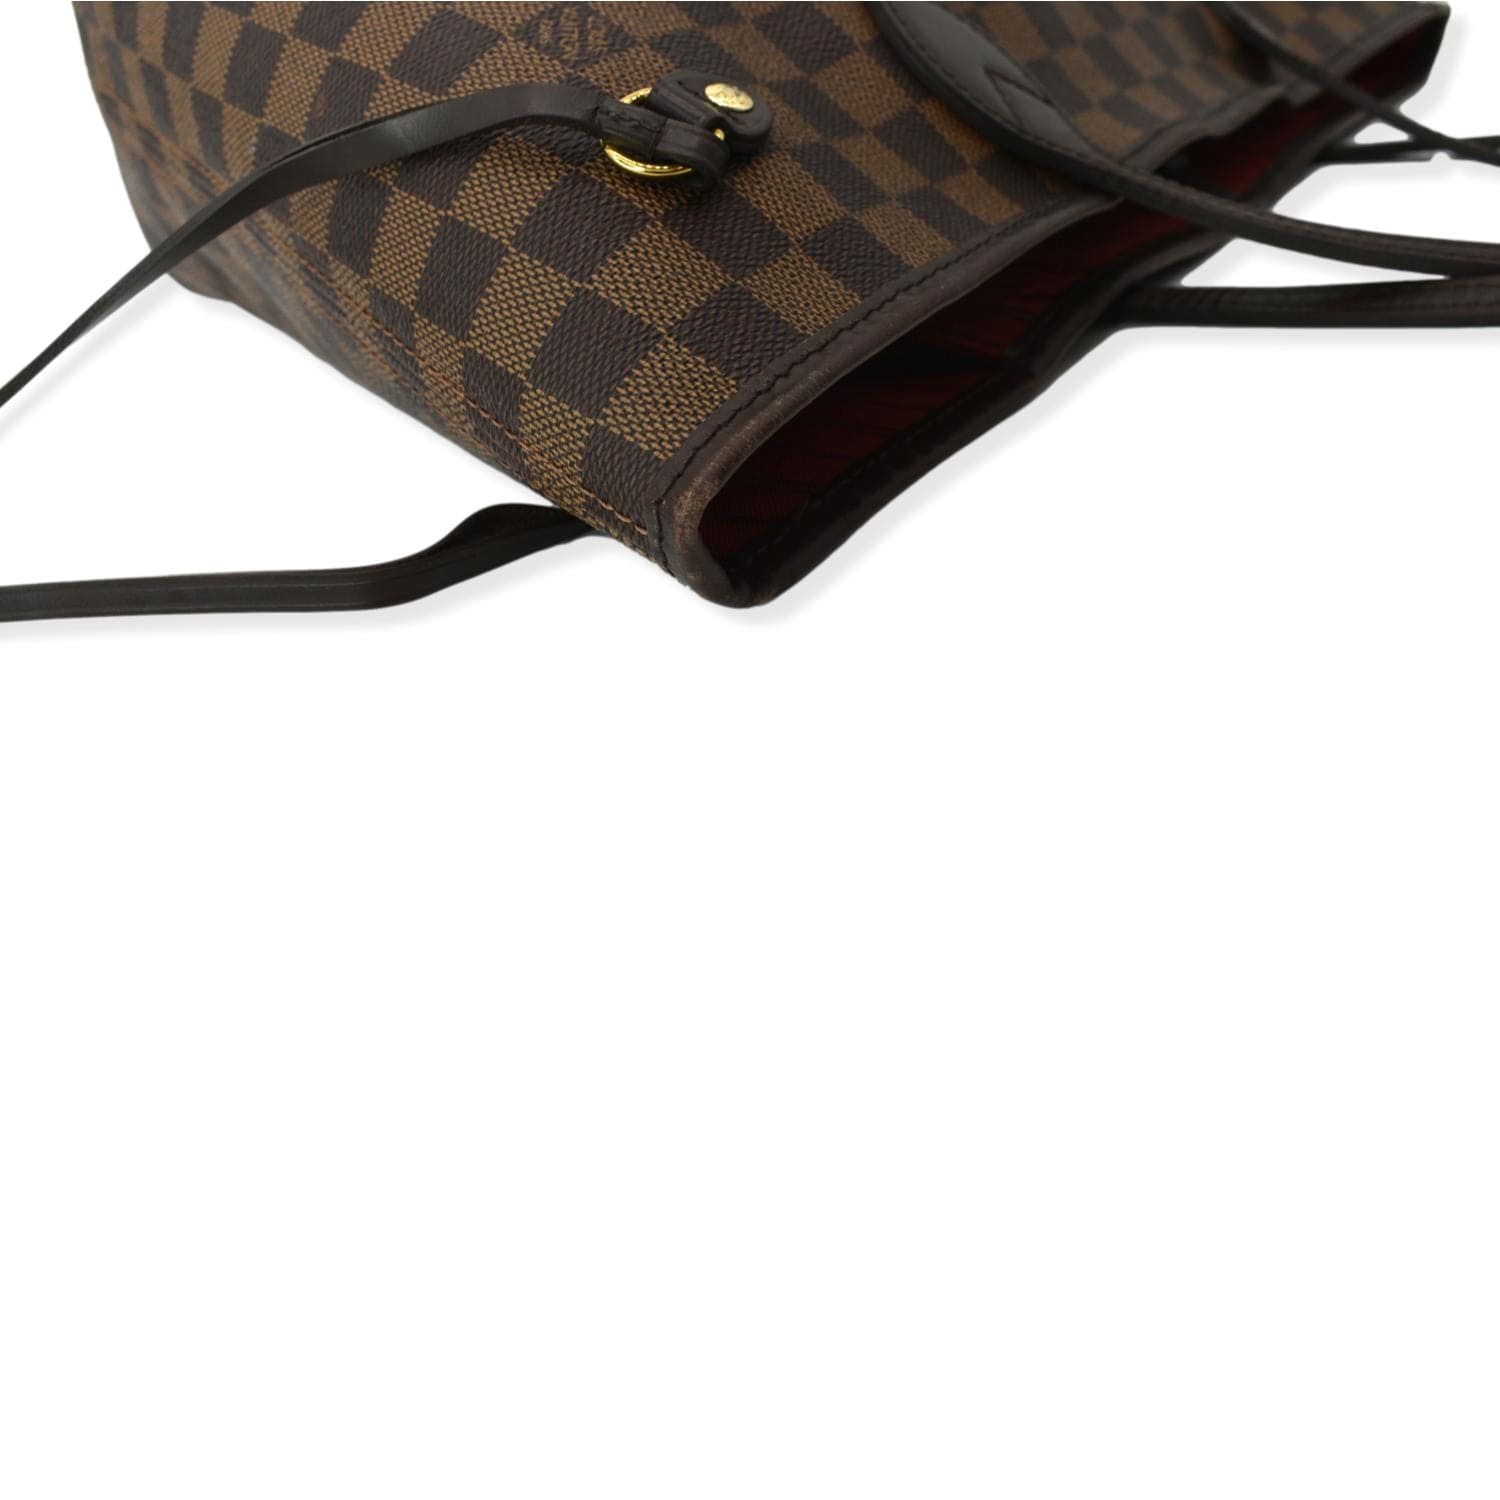 Neverfull leather tote Louis Vuitton Brown in Leather - 23876231